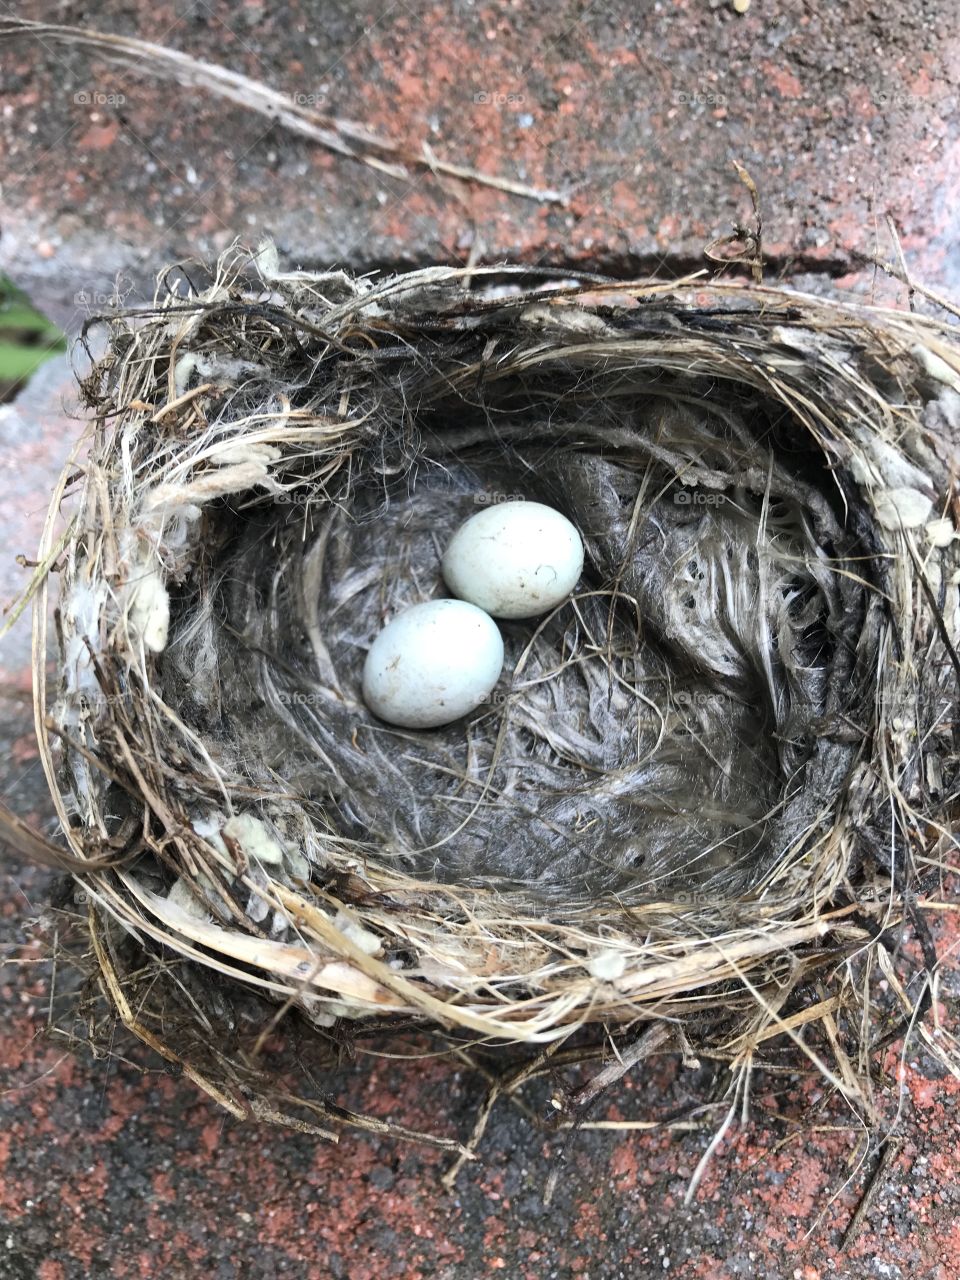 Birds left their two eggs in their nest, left to hatch